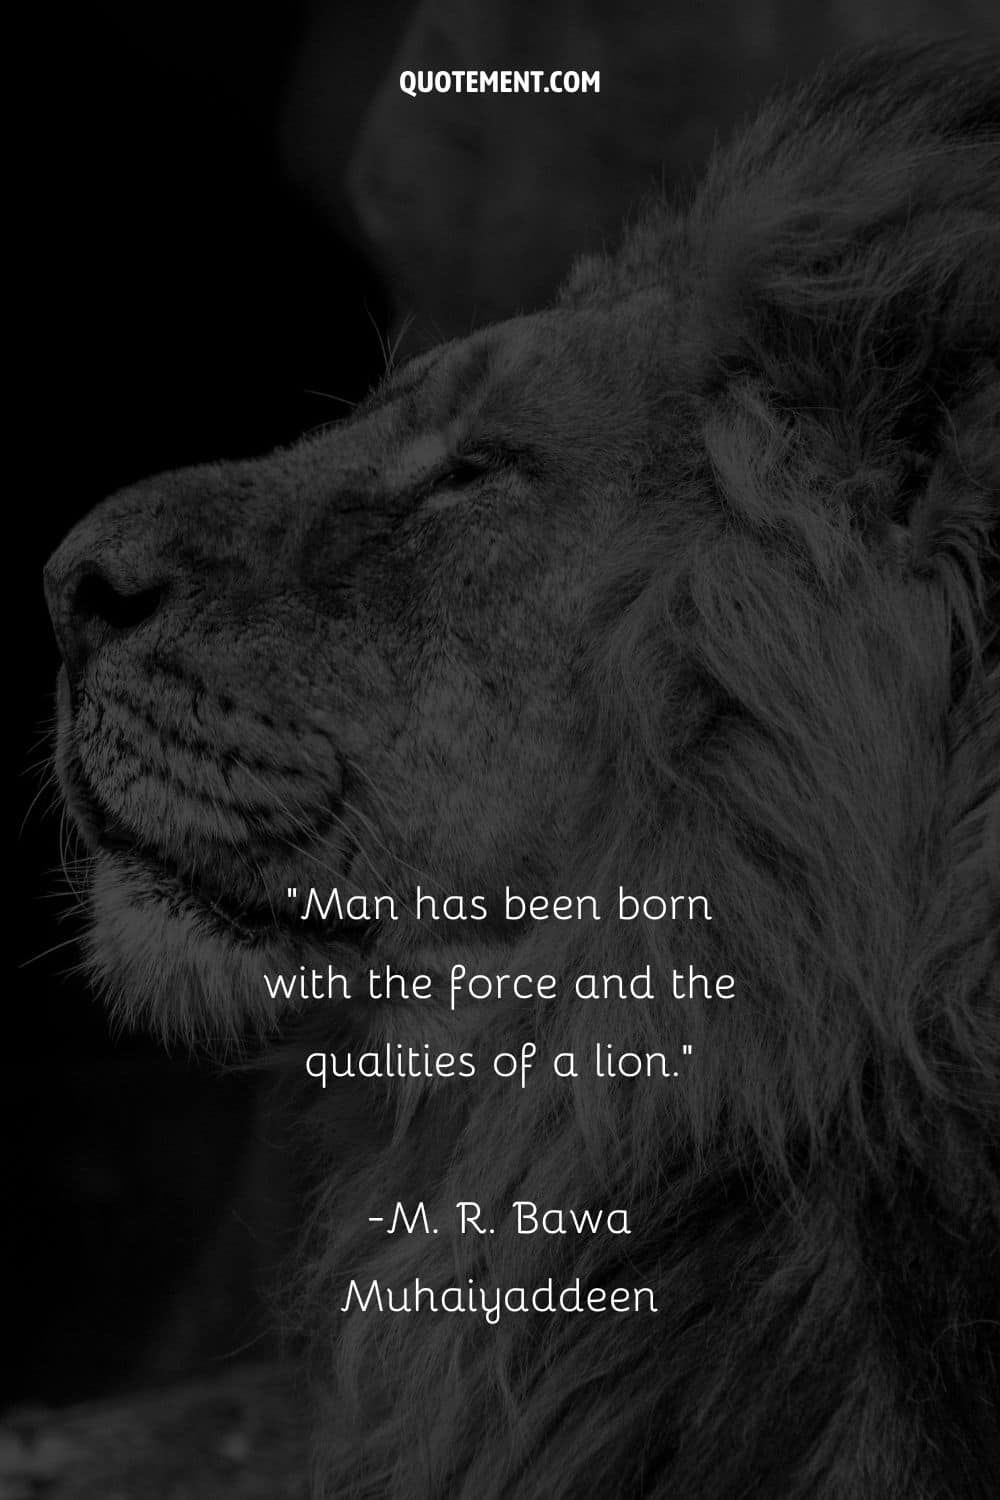 Man has been born with the force and the qualities of a lion